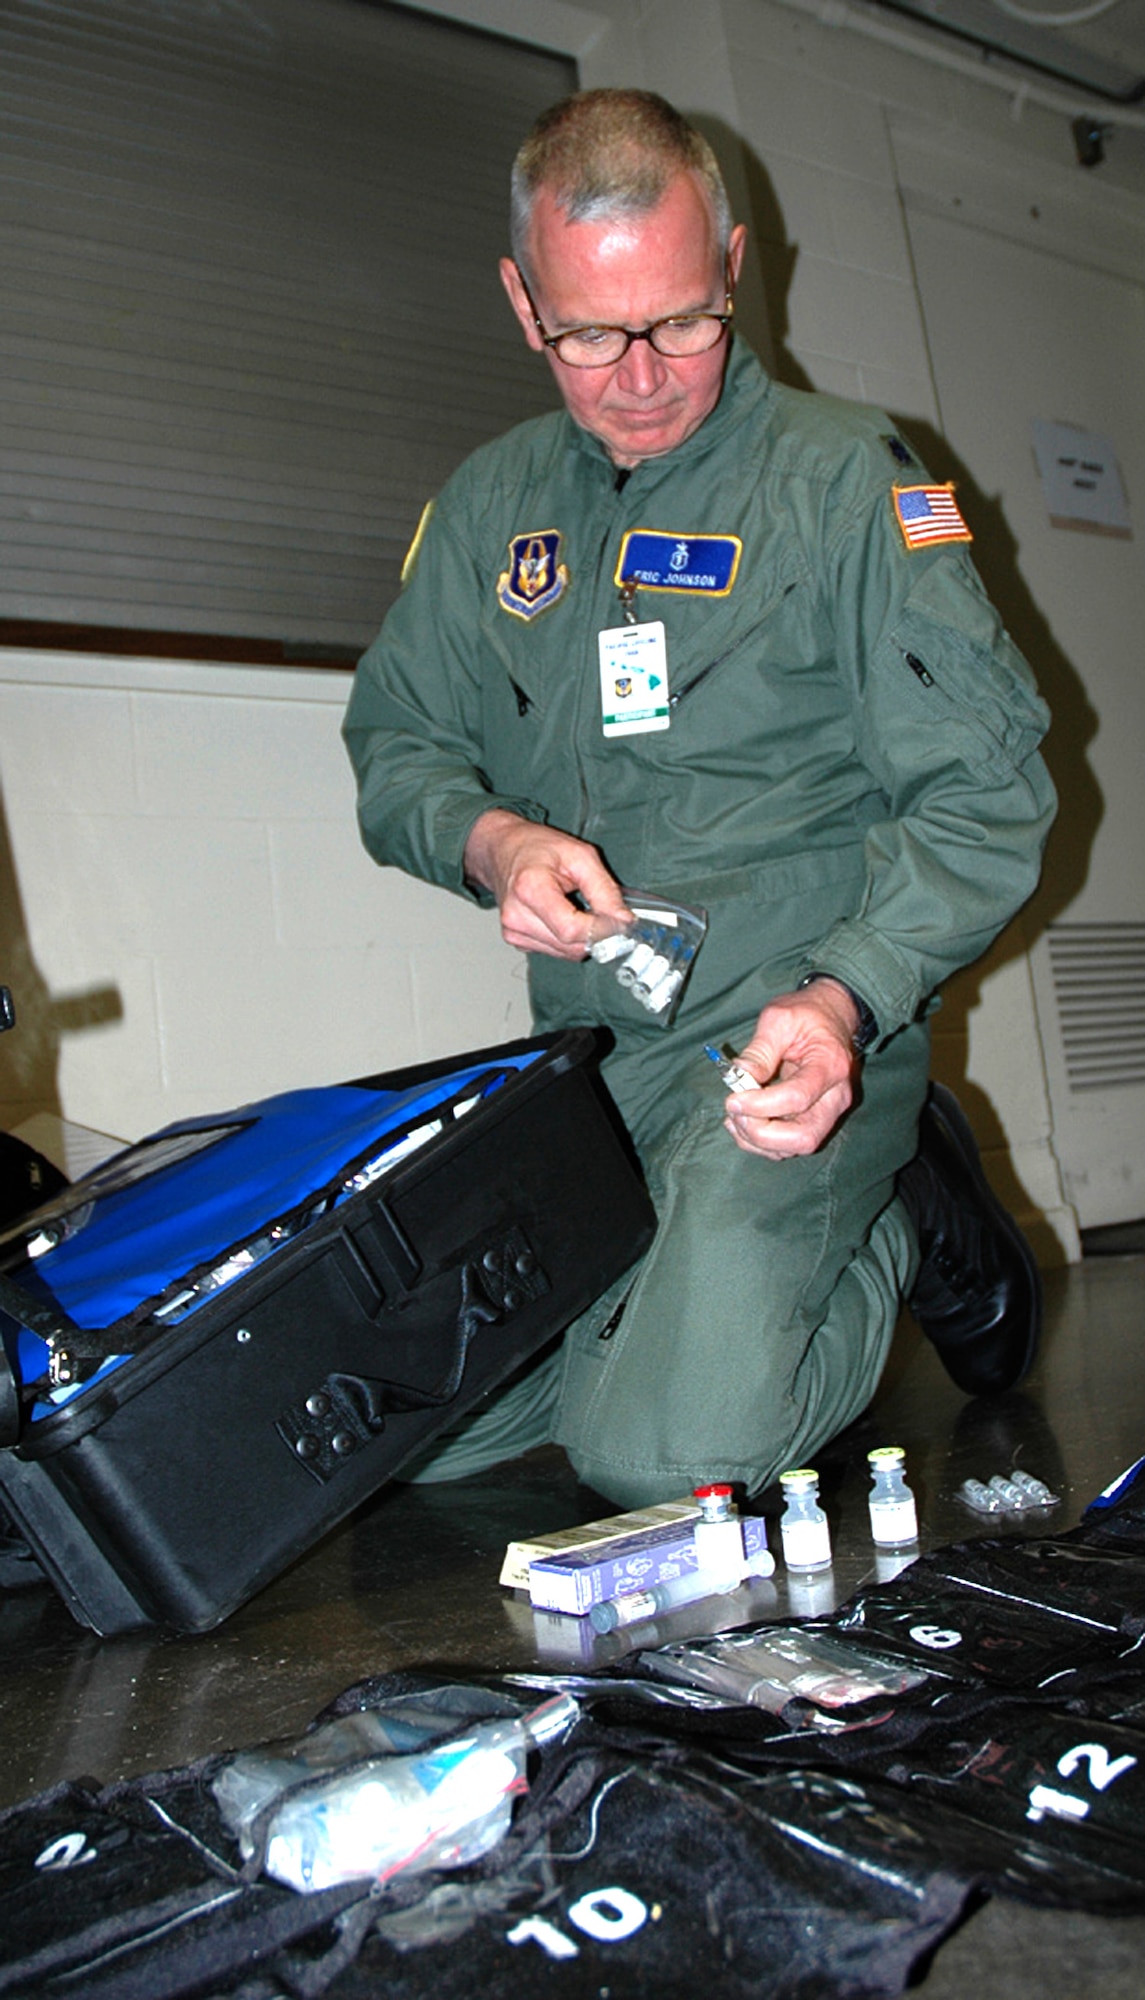 Lt. Col. (Dr.) Eric Johnson, an anesthesiologist with the 446th Aeromedical Staging Squadron, McChord Air Force Base, Wash.,  inventories the drug kit to make sure the Critical Care Air Transport team has every medicine it will need during flights for the Pacific Lifeline exercise.  Pacific Lifeline is a humanitarian assistance disaster response exercise taking place over three Hawaiian Islands Jan. 26 to Feb. 9.  More than 900 Department of Defense personnel are participating, including 145 Reservists from the 446th Airlift Wing at McChord. (U.S. Air Force photo/Capt. Jennifer Gerhardt)